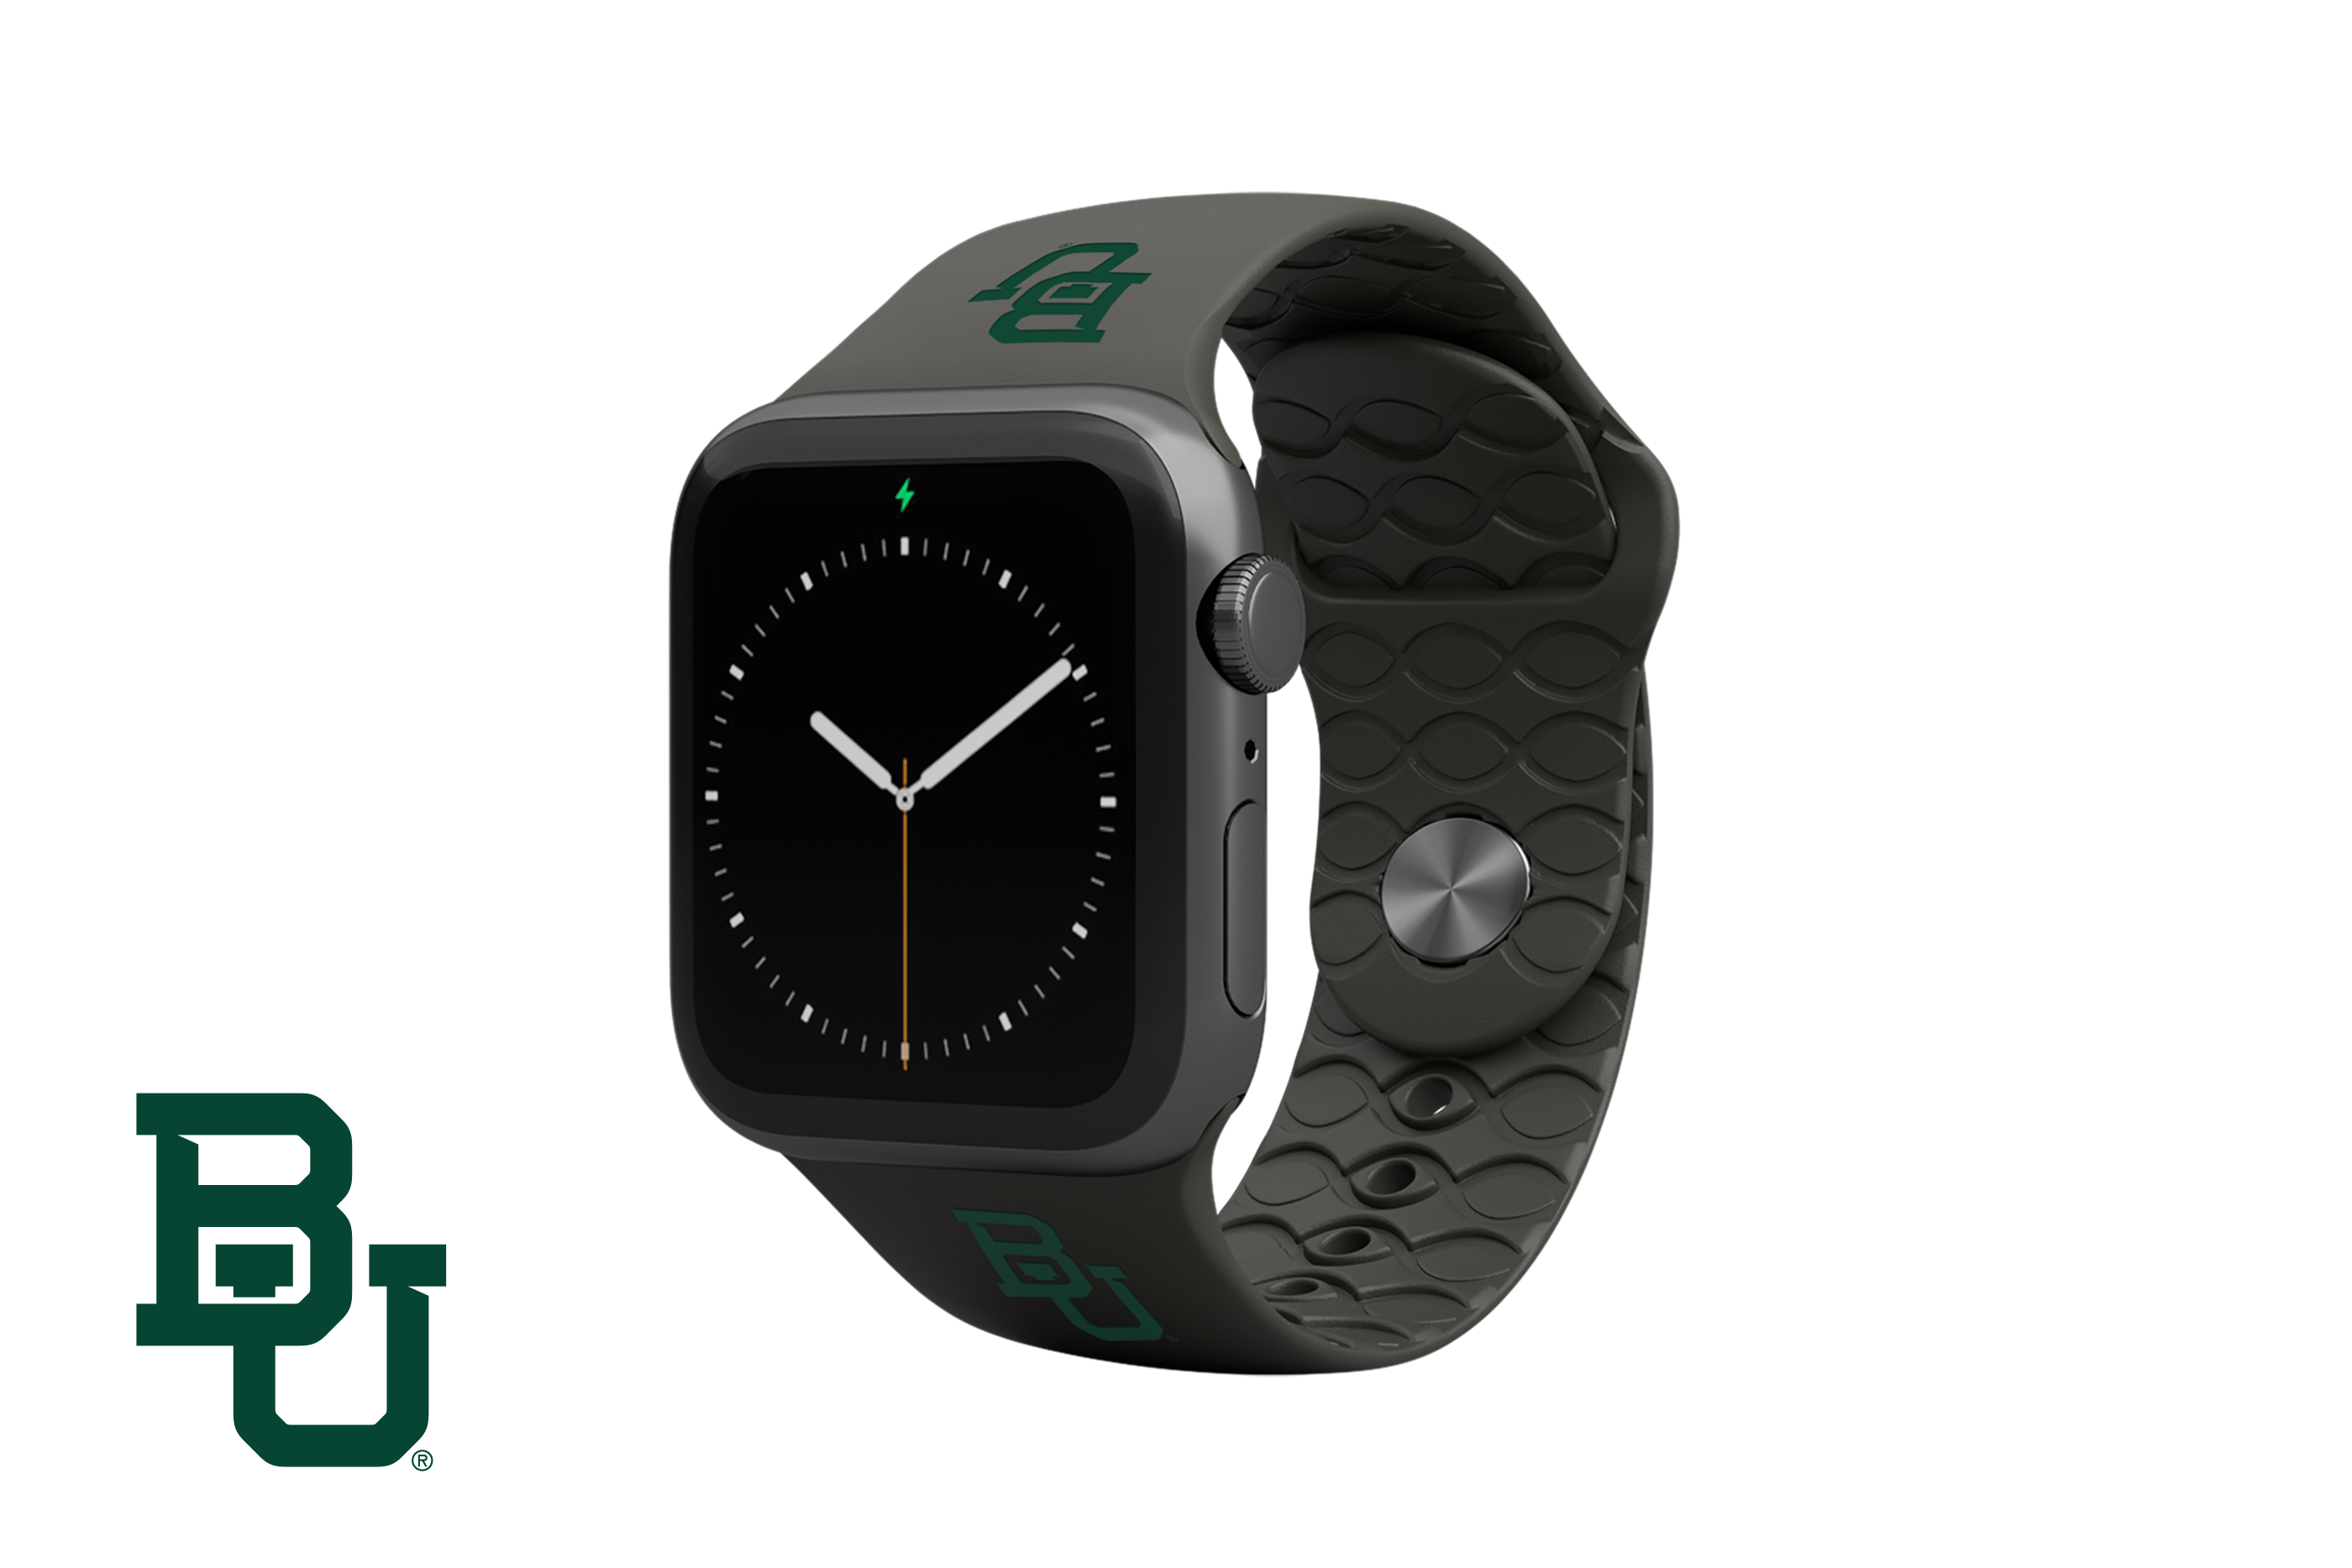 Apple Watch Band College Baylor Black with gray hardware viewed front on